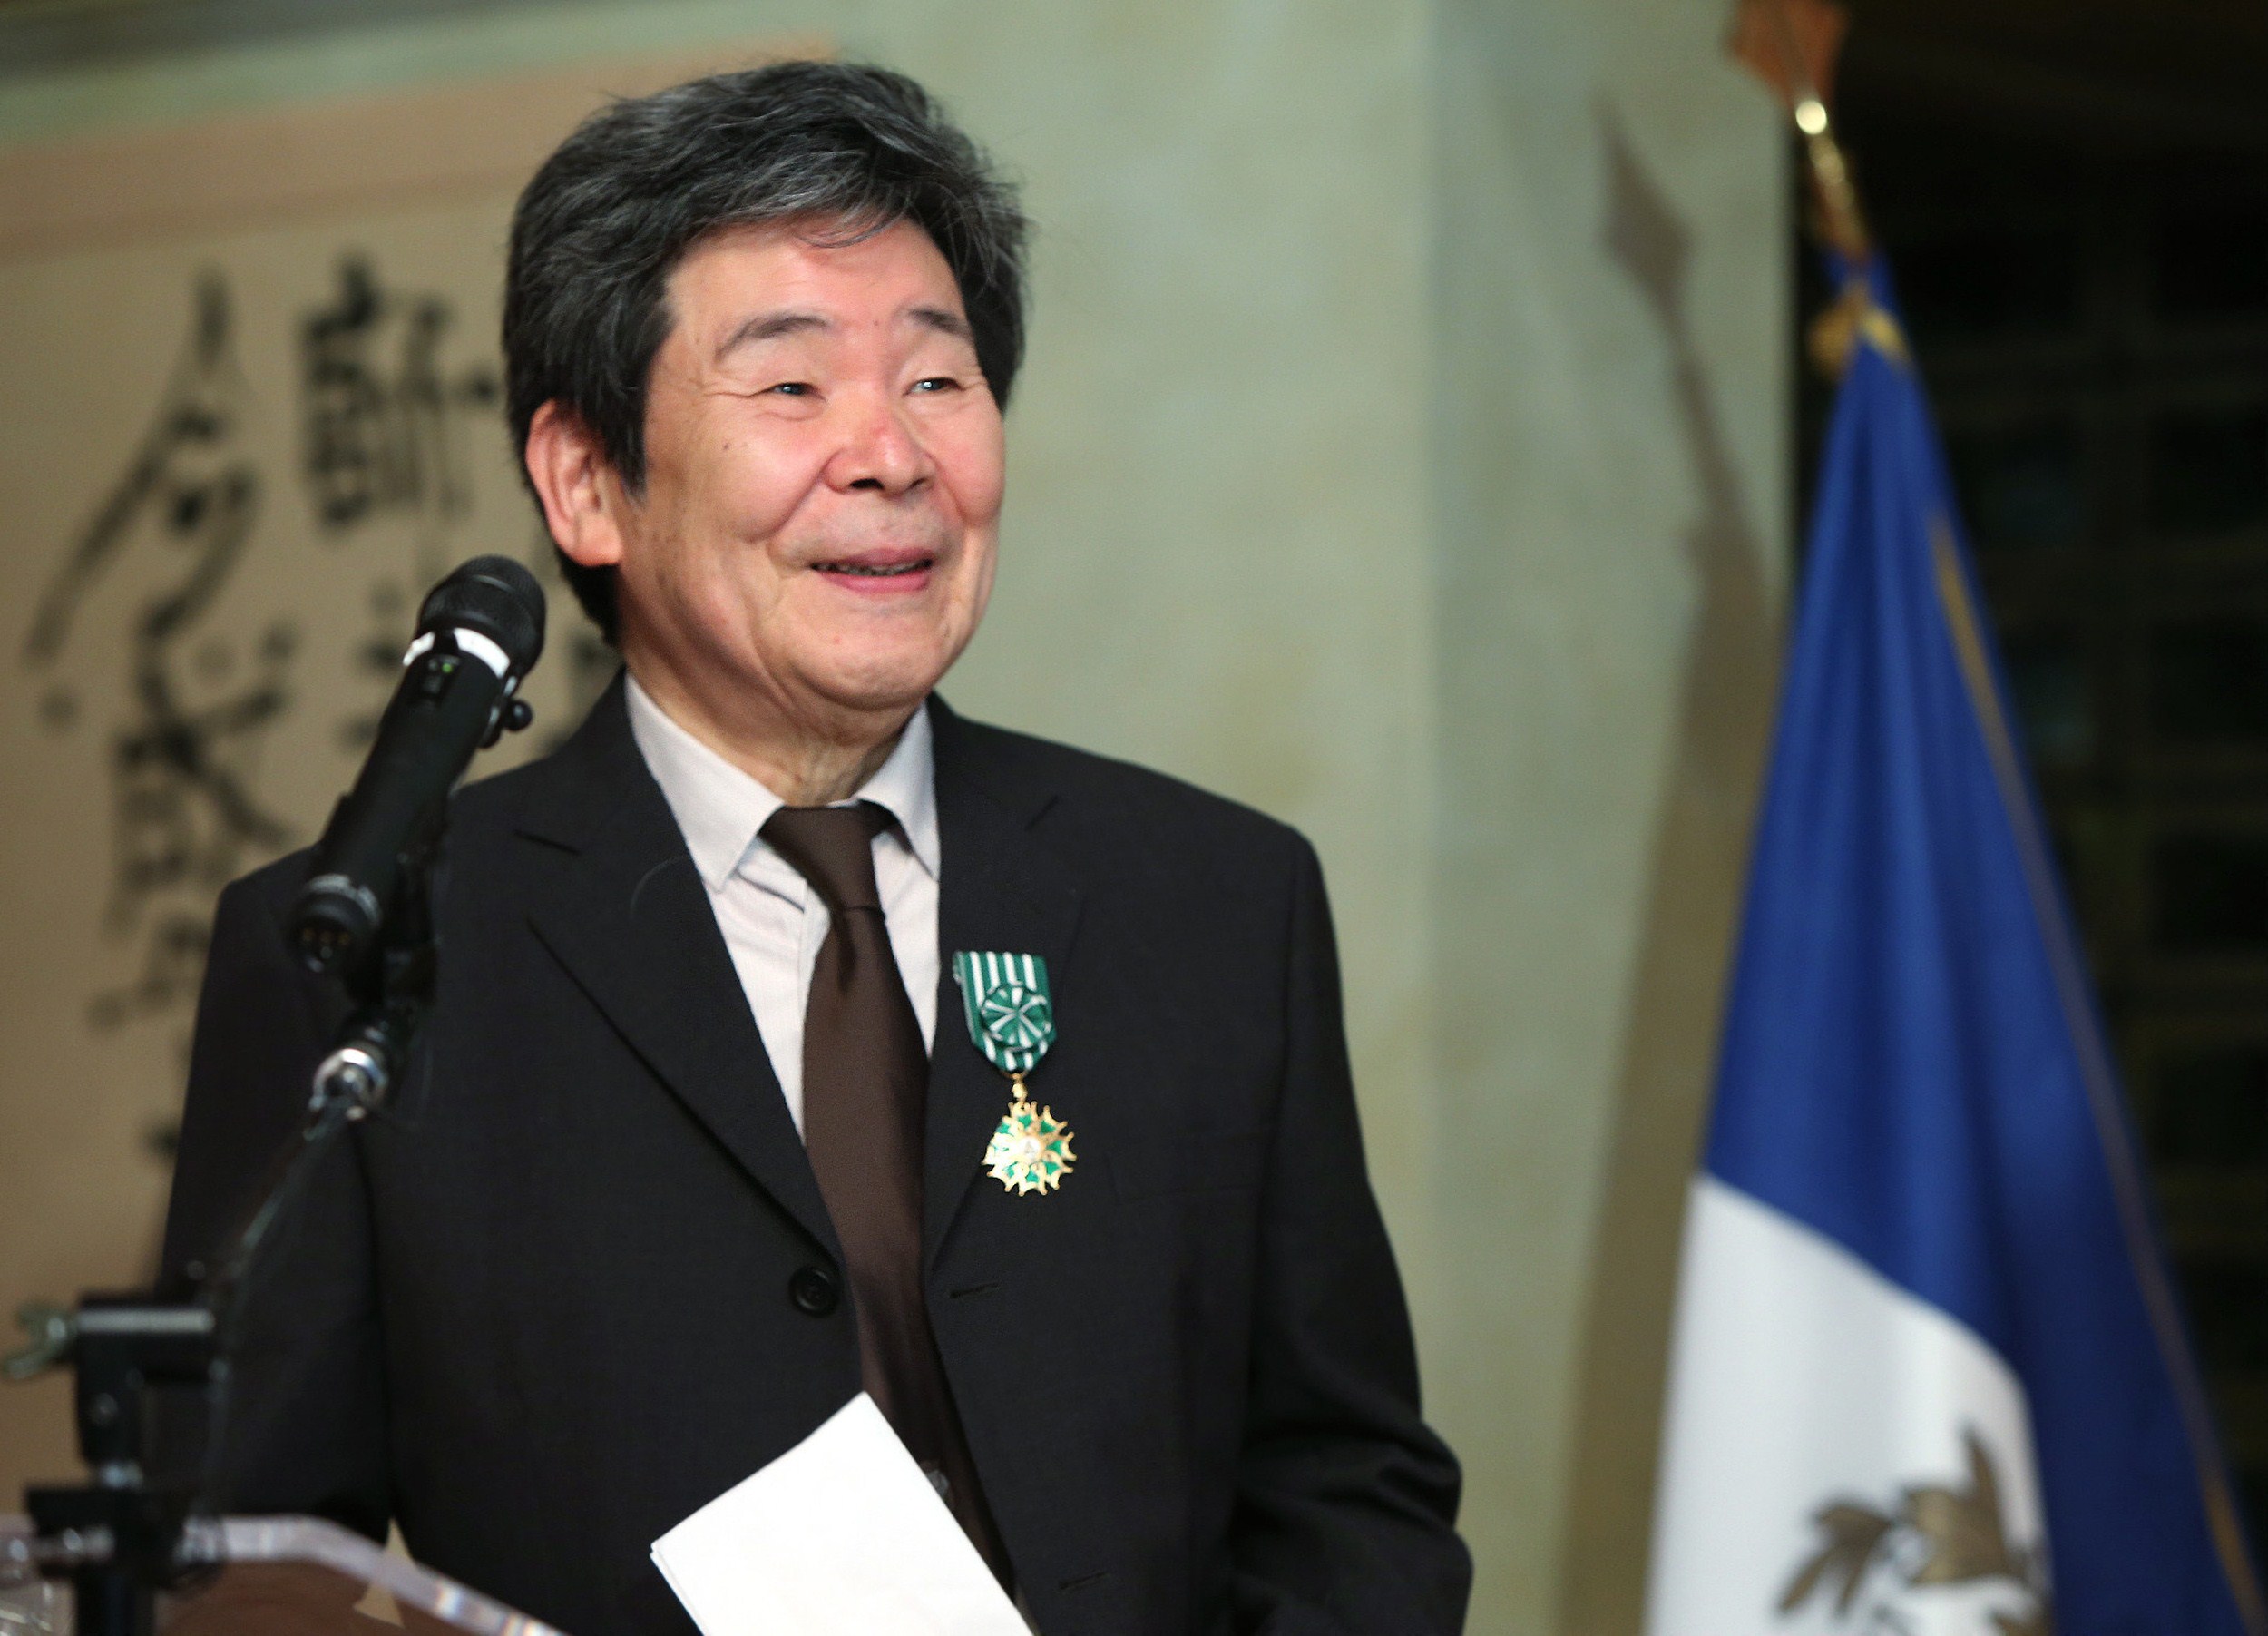 Isao Takahata receives the "Officier of L'Ordre des Arts et des Letters" from French ambassador to Japan Thierry Dana at the French embassy in Tokyo on April 7, 2015. Takahata died on April 5, 2018, aged 82. (Jiji Press—AFP/Getty Images)